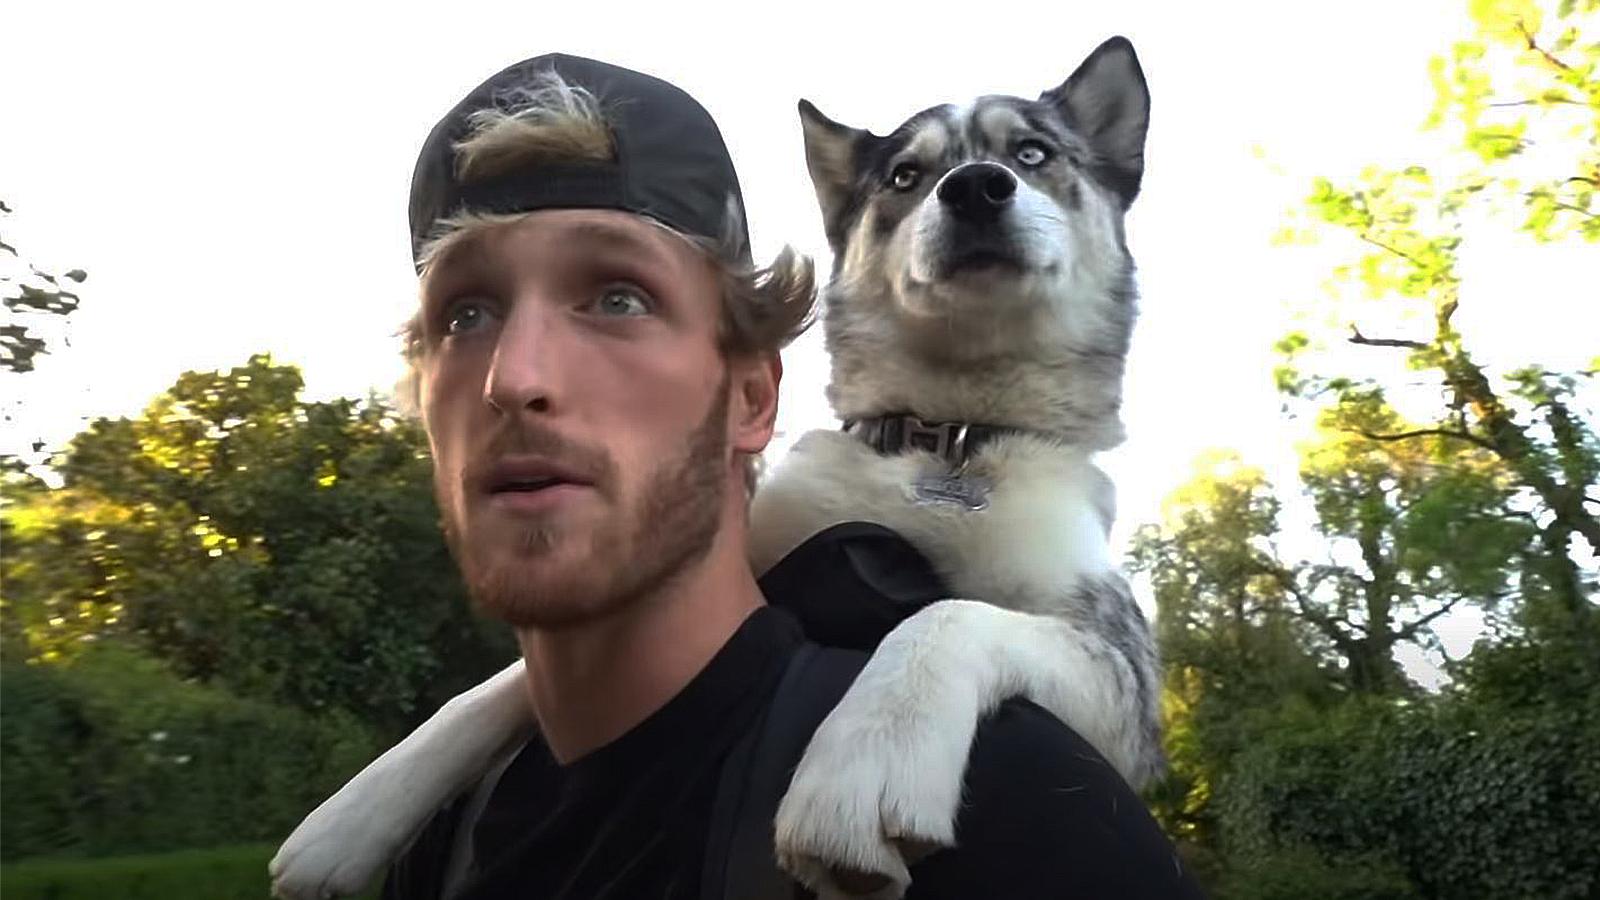 Logan Paul rides a skateboard with his dog Broley.